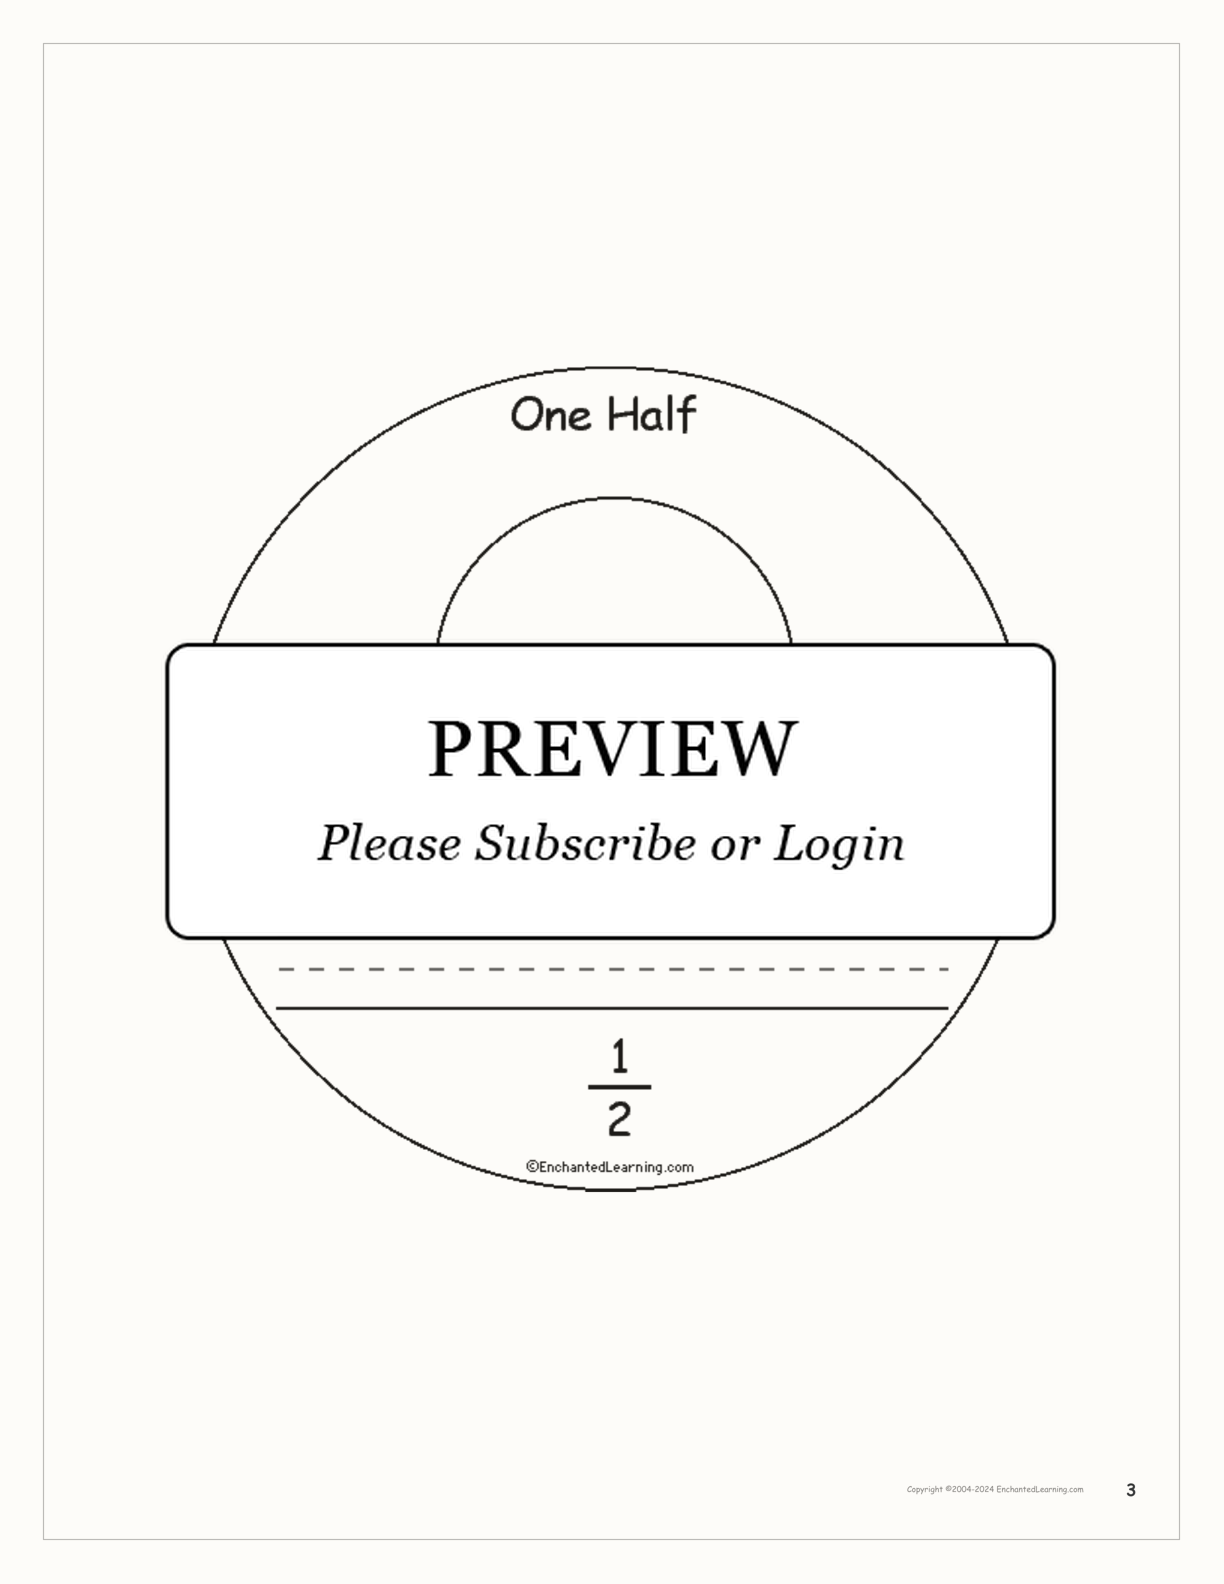 One Half: A Book on Fractions interactive printout page 3